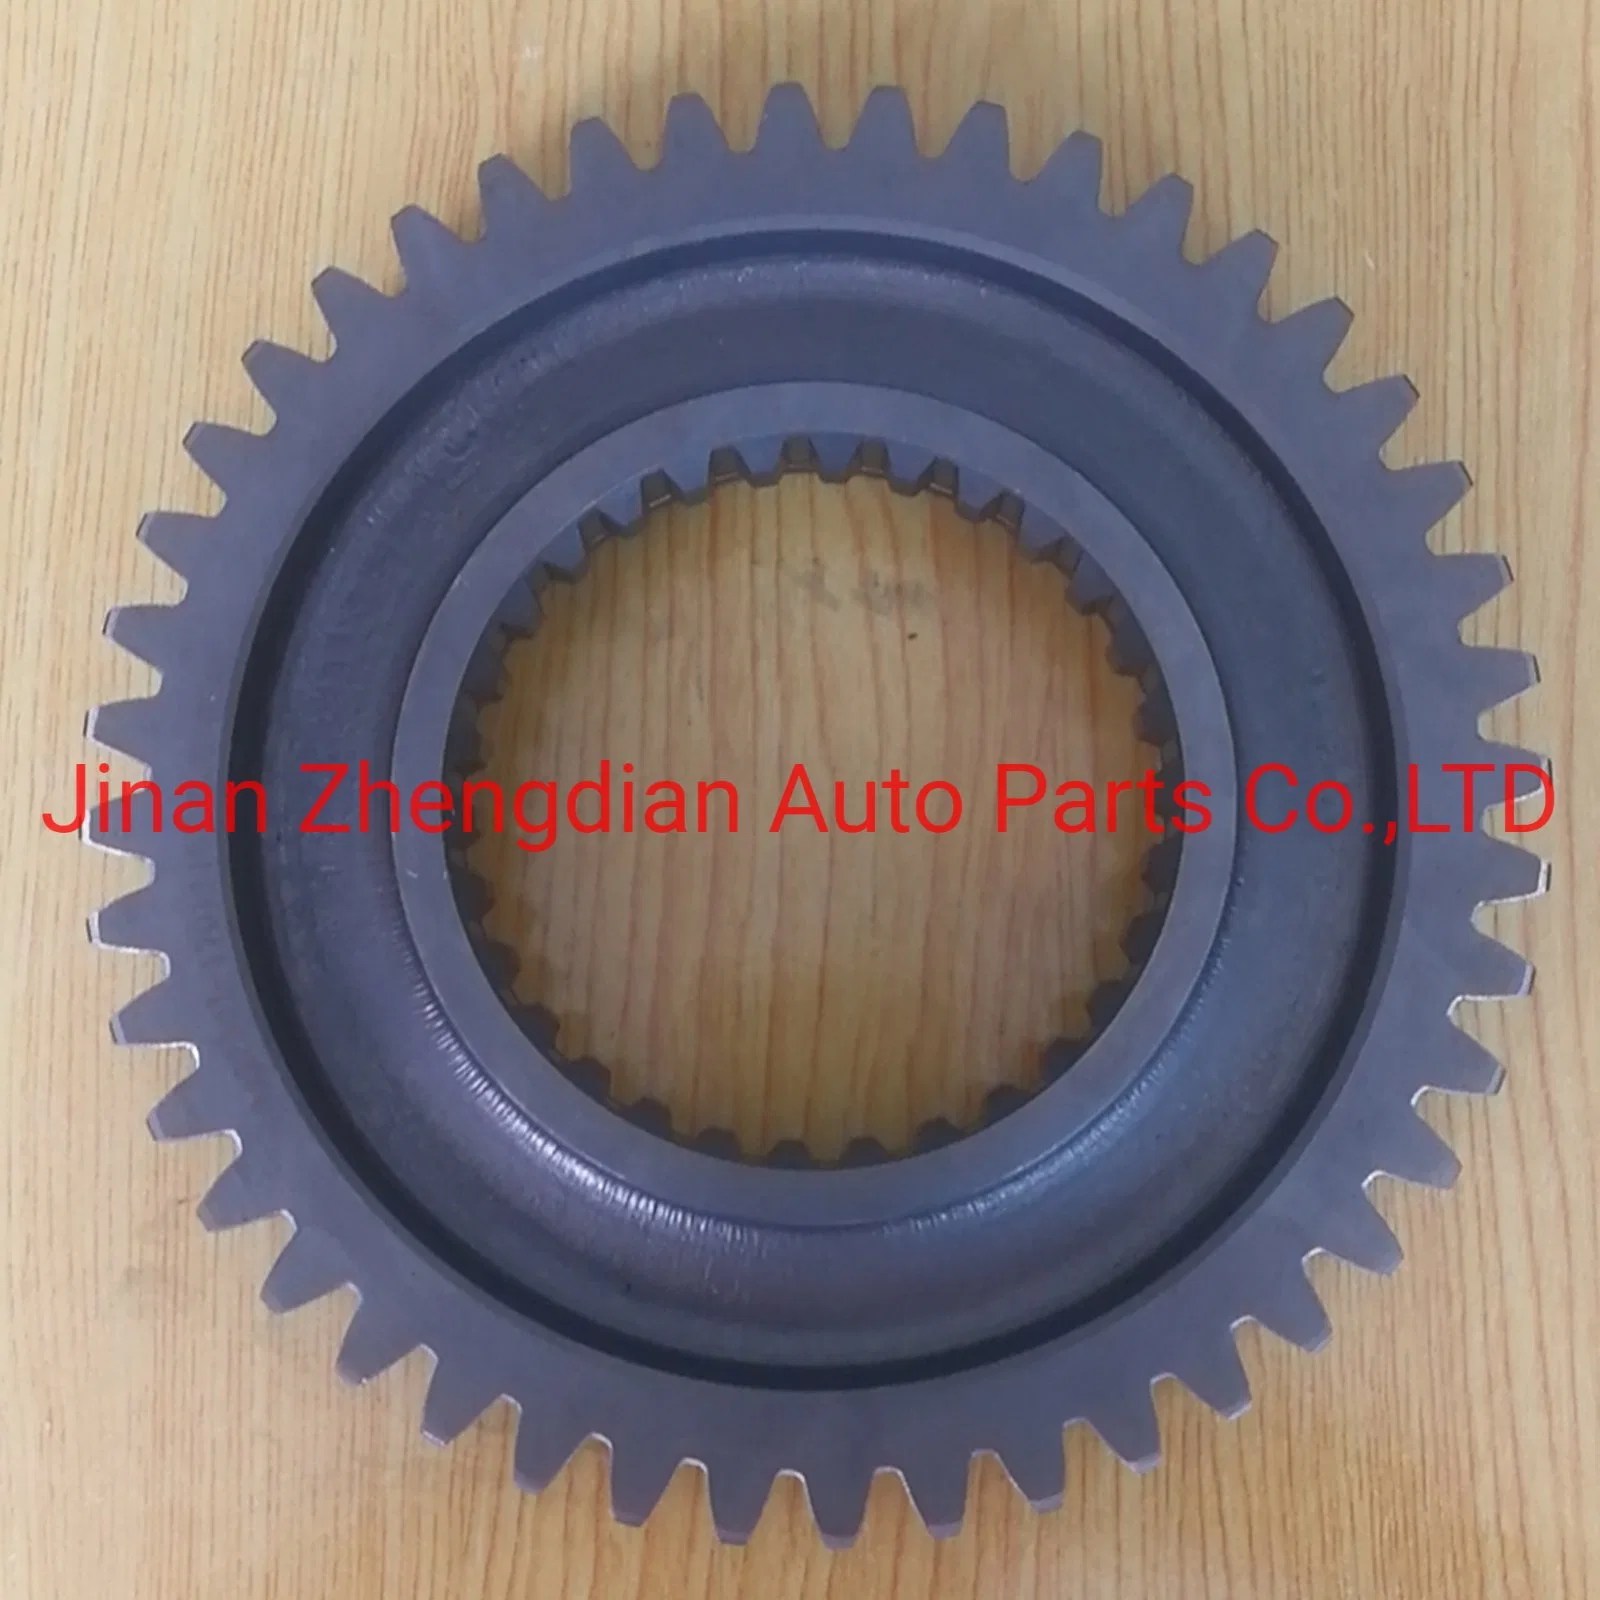 12js200t-1701051 Fast Gearbox Gear Auto Spare Parts for Beiben North Benz Sinotruk HOWO Sitrak Shacman FAW Foton Auman Hongyan Camc Dongfeng Truck